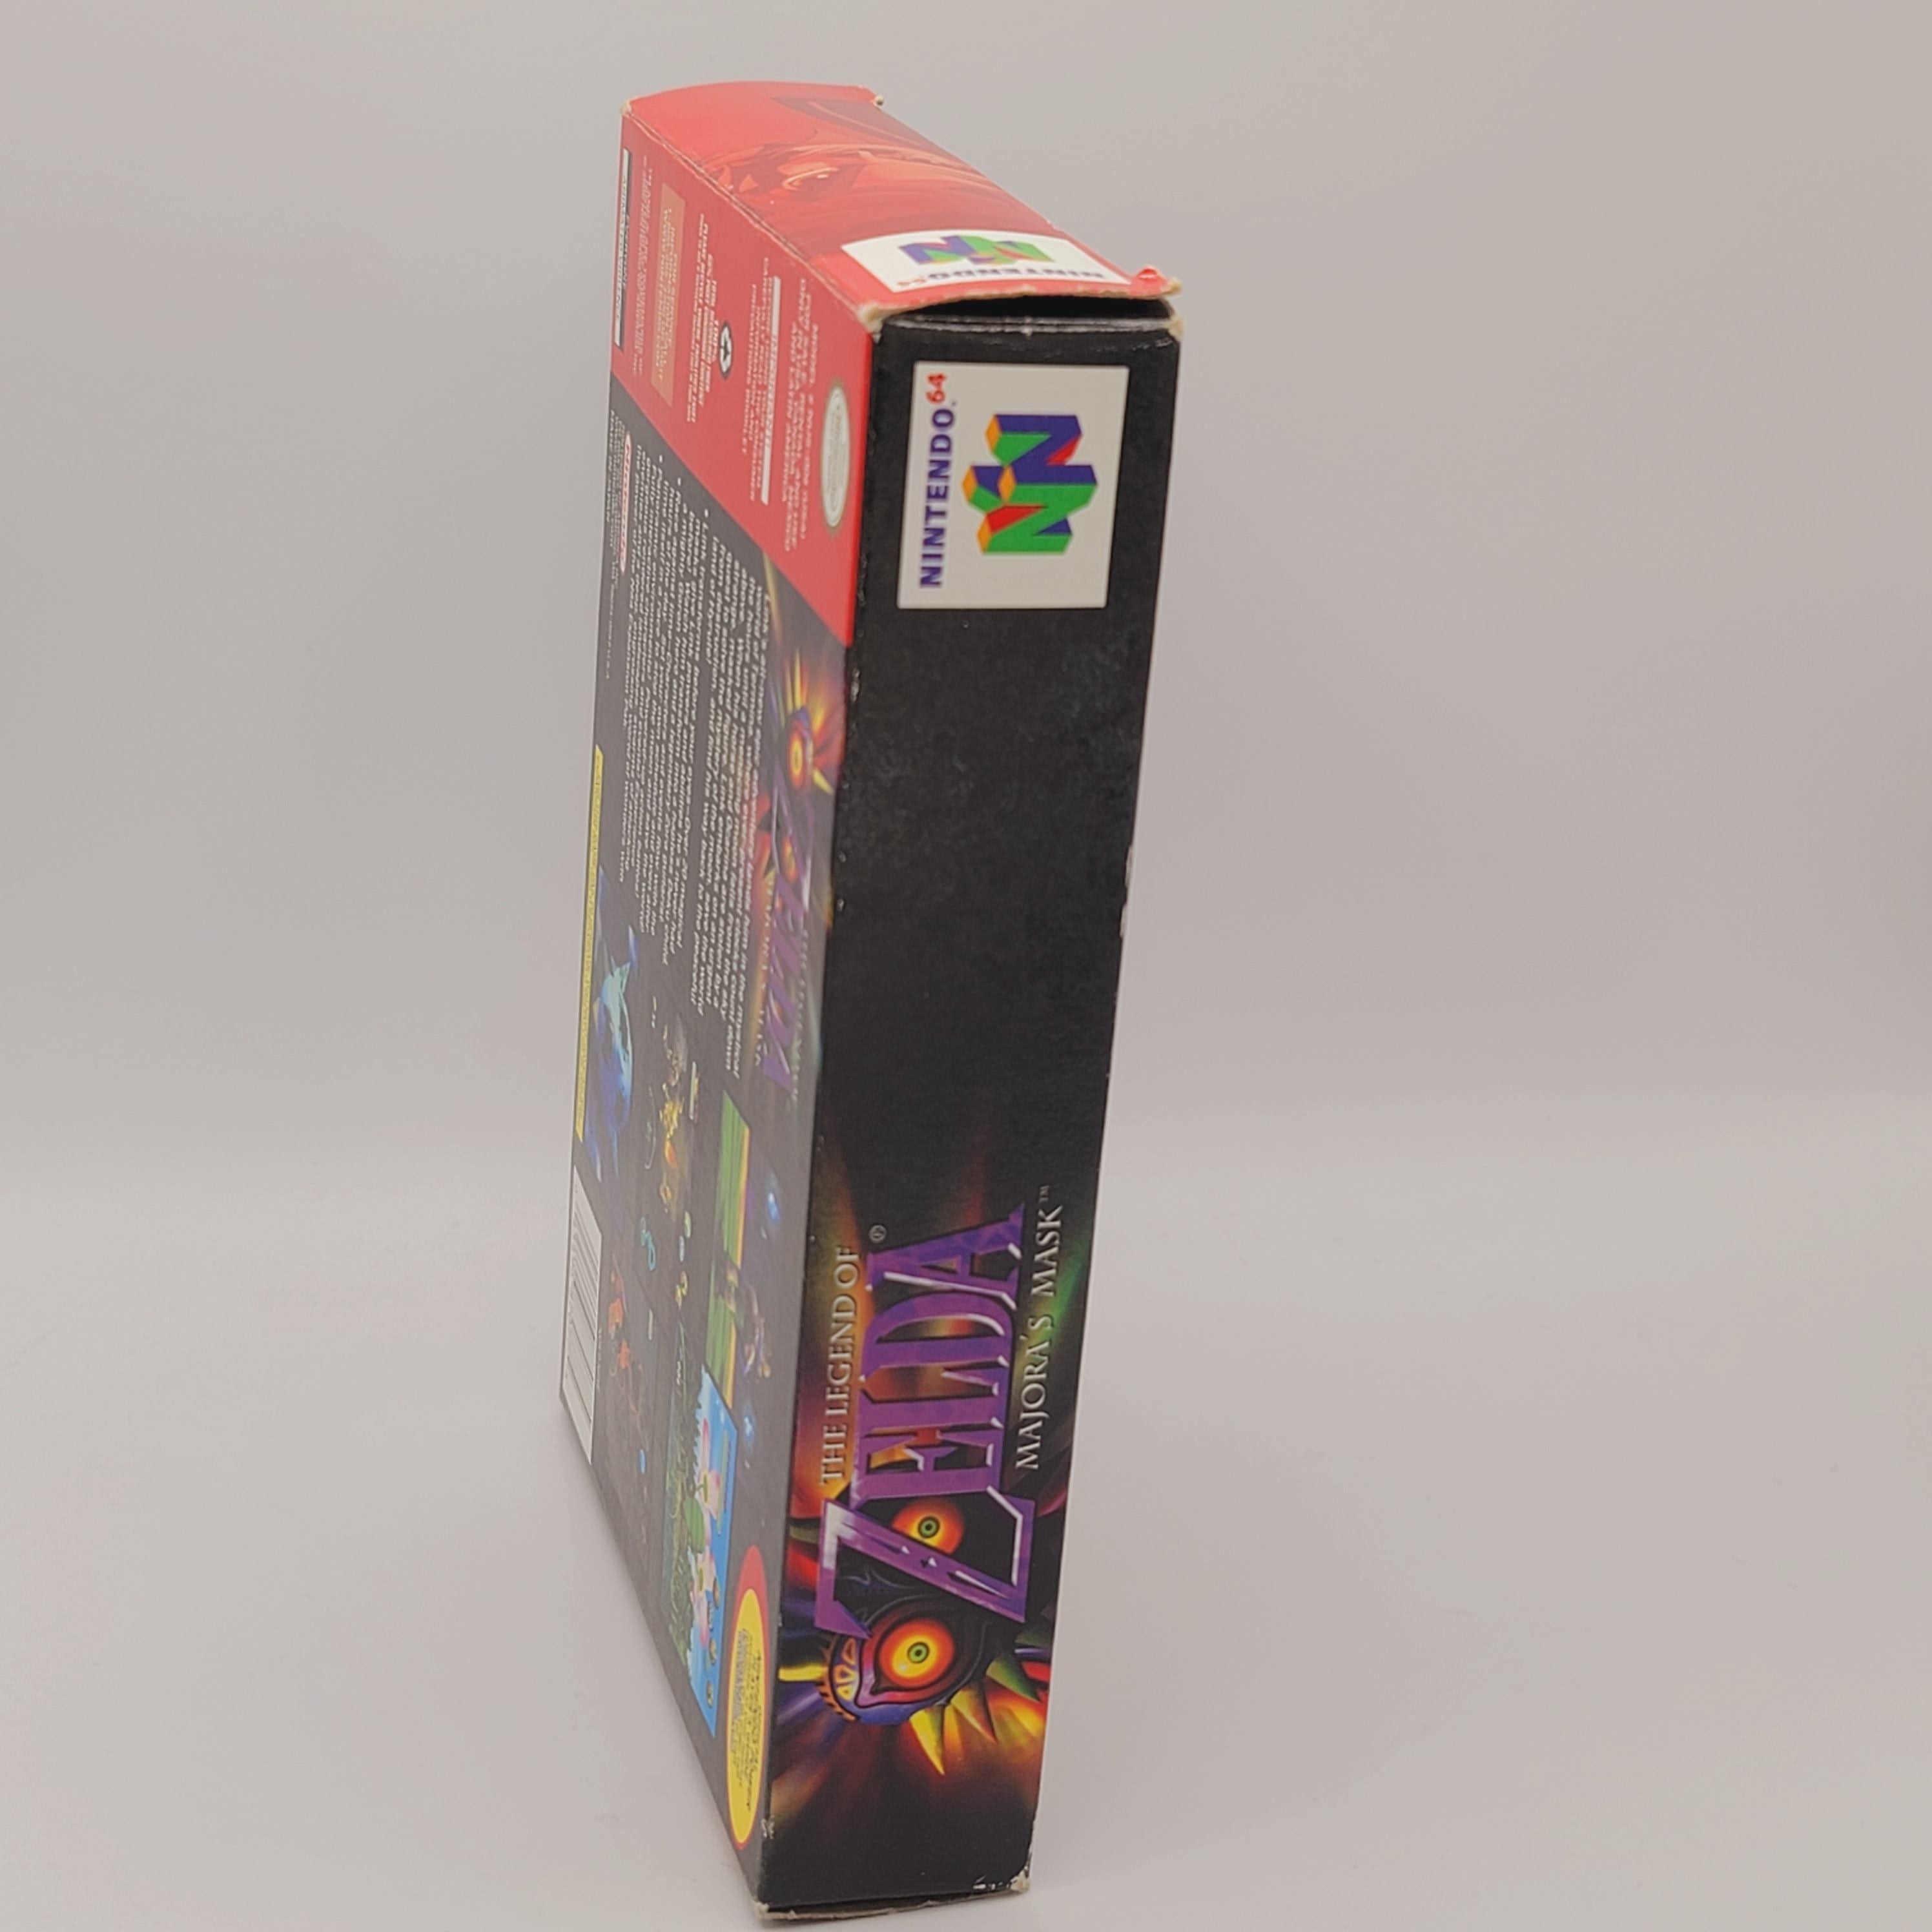 N64 - The Legend of Zelda Majora's Mask Collector's Edition (Complete in Box / A- / With Manual)